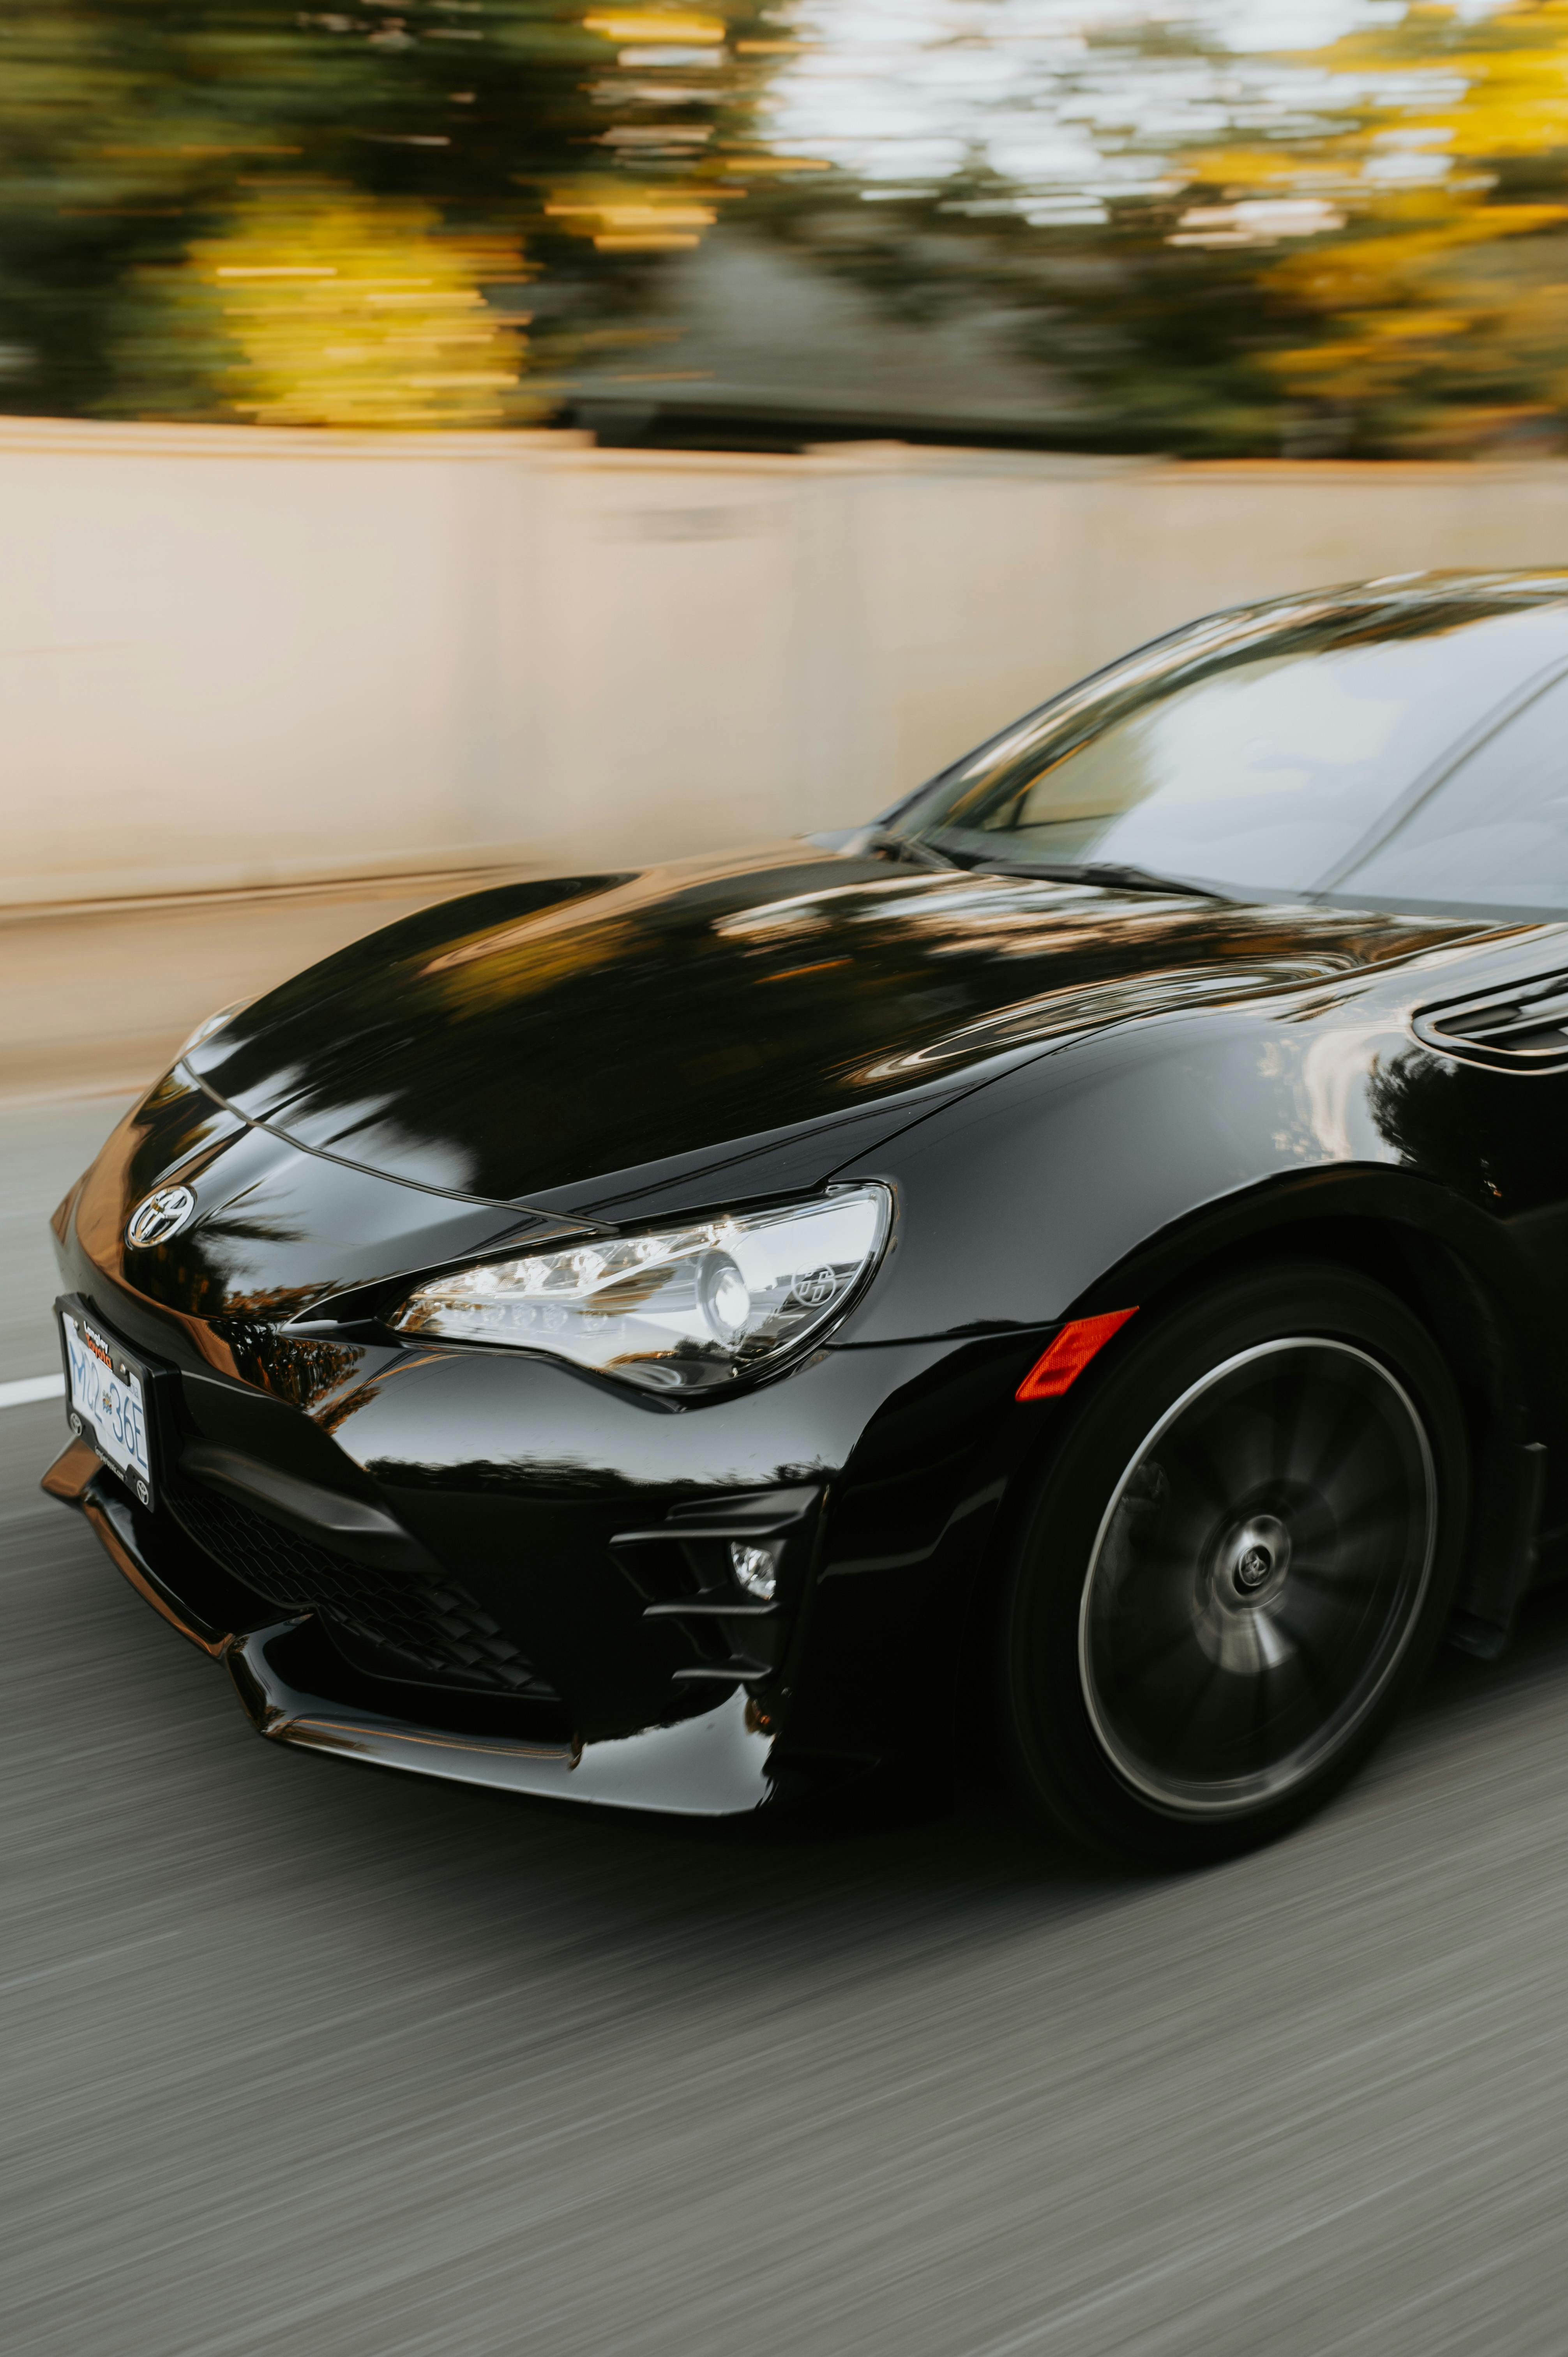 Toyota 86 Photos Download The Best Free Toyota 86 Stock Photos Hd Images